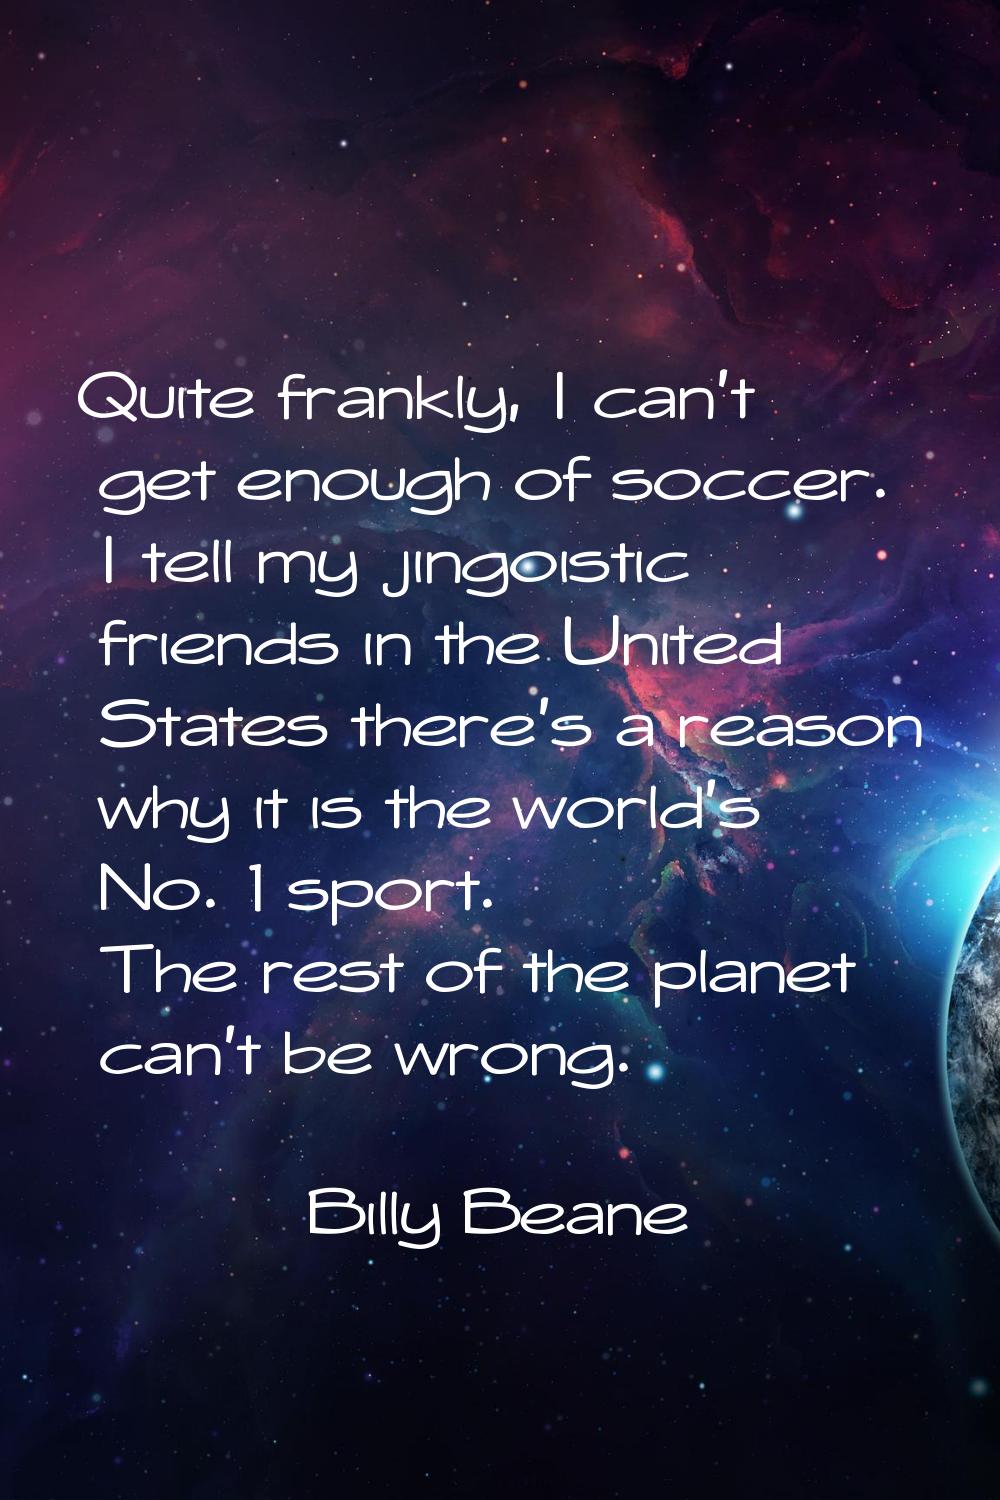 Quite frankly, I can't get enough of soccer. I tell my jingoistic friends in the United States ther